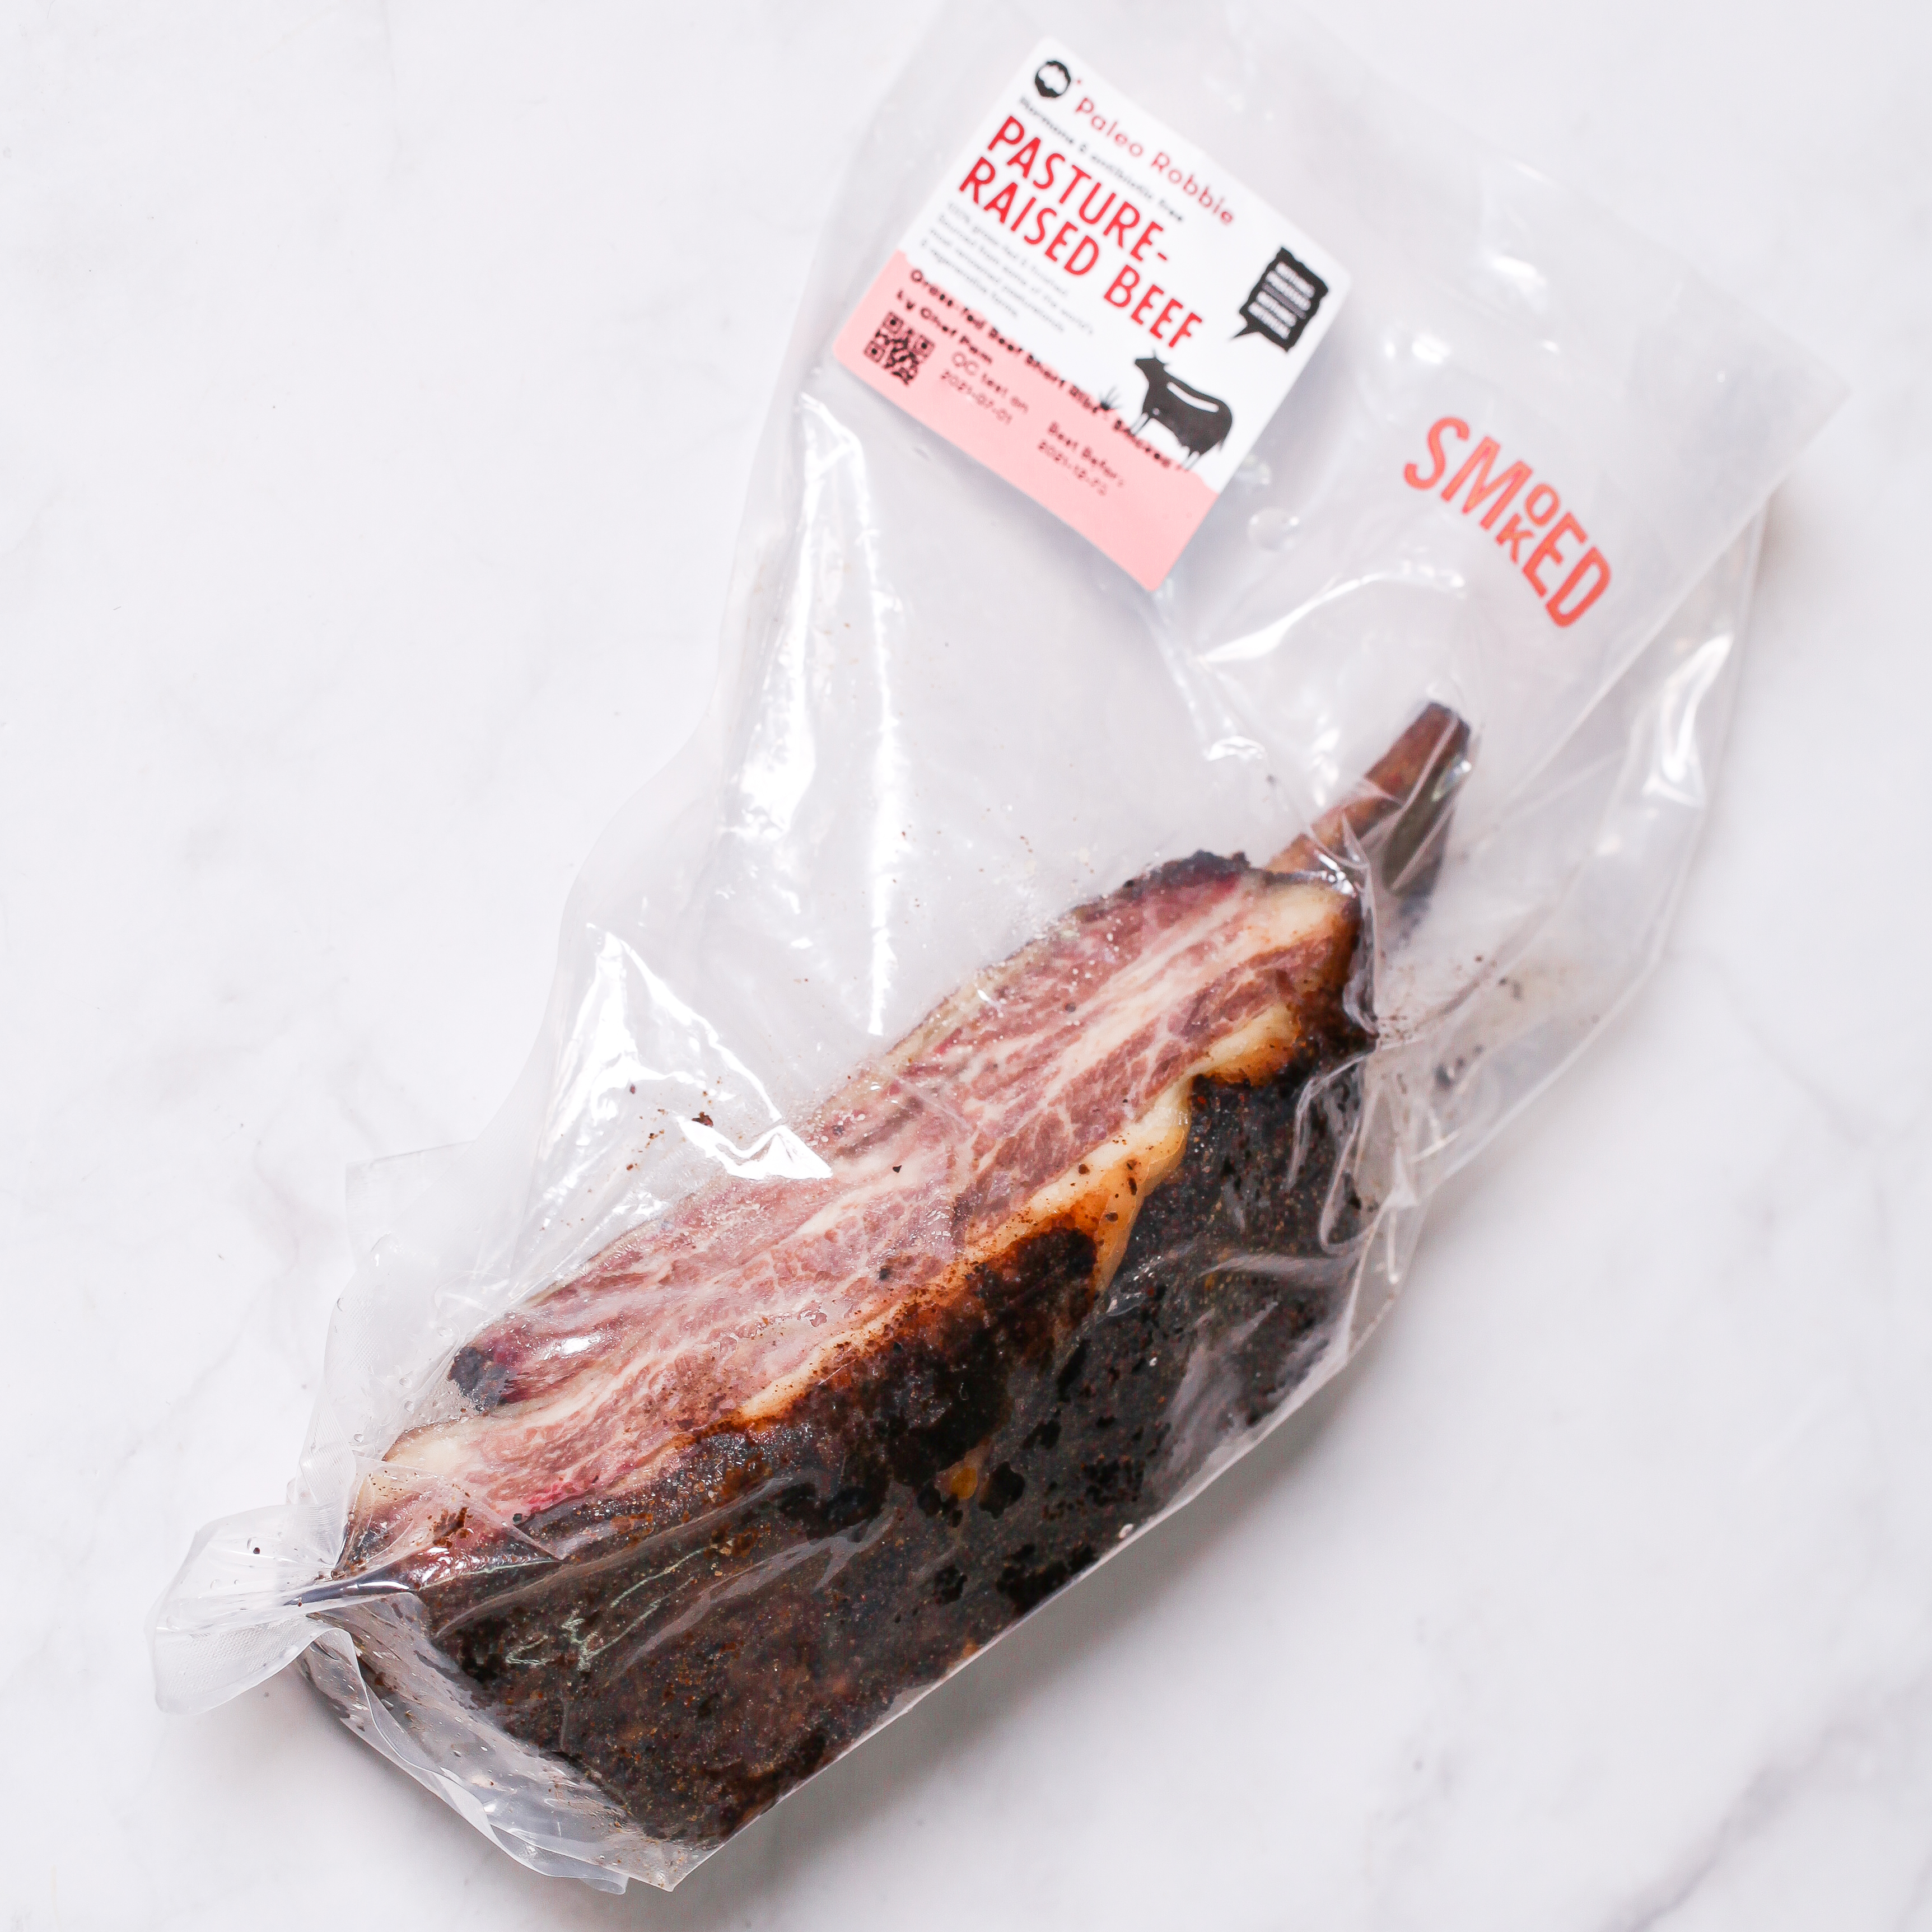 Grass-fed Beef Short Ribs - Smoked by Chef Pam